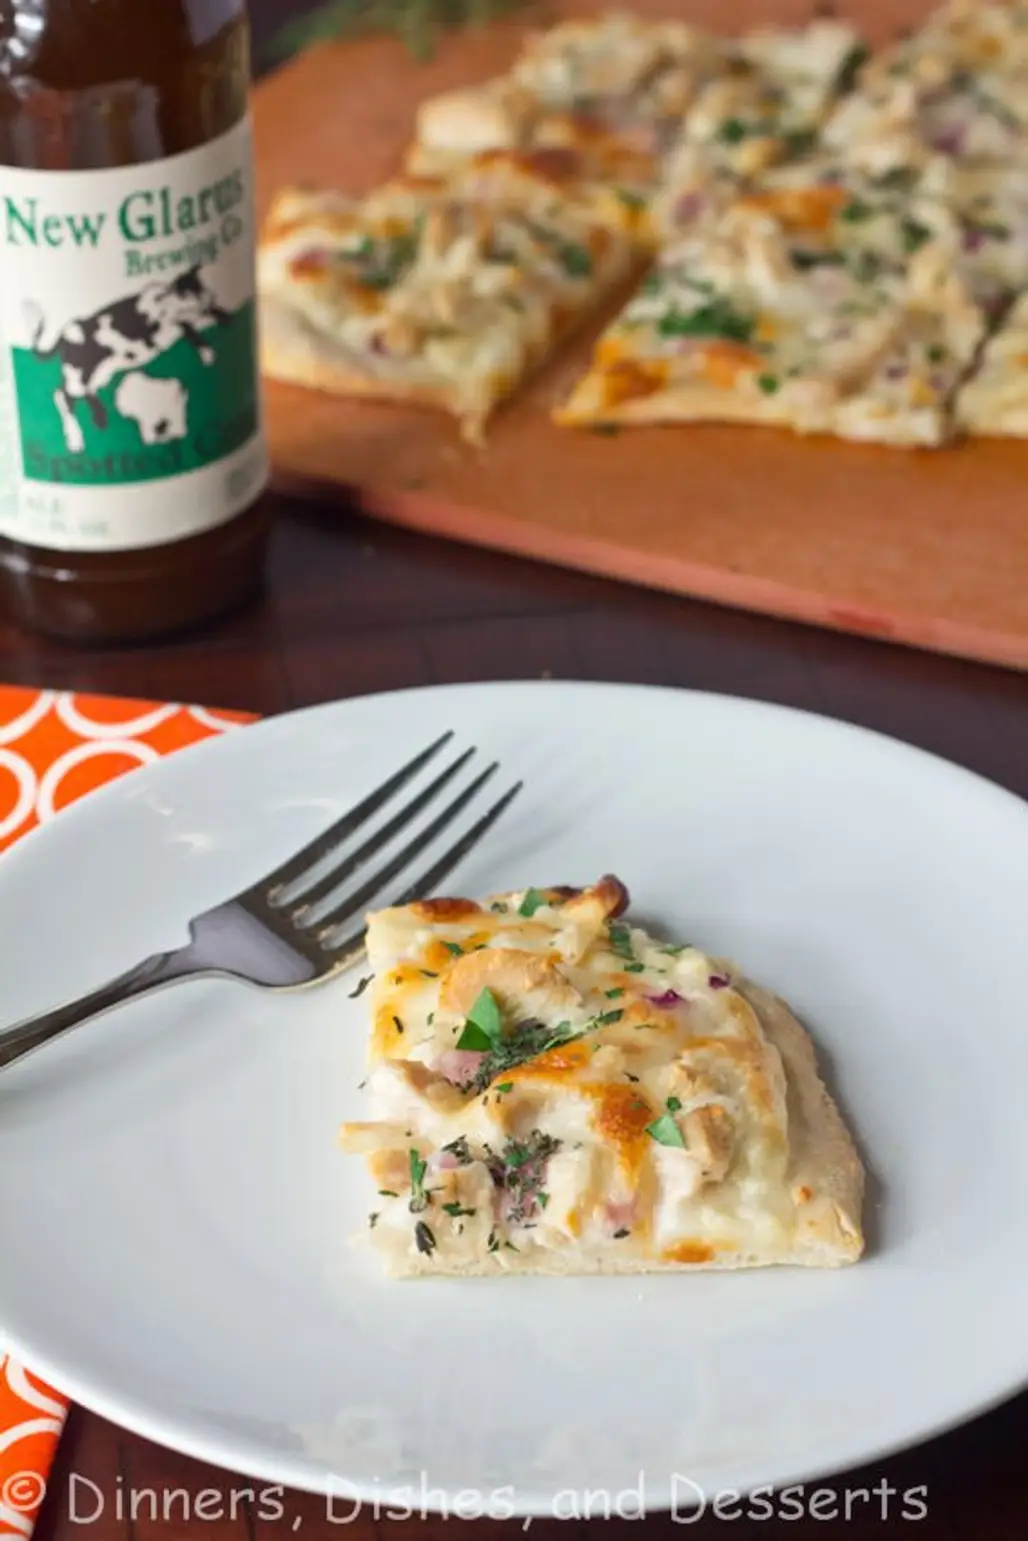 Roasted Garlic, Chicken, and Herb White Pizza